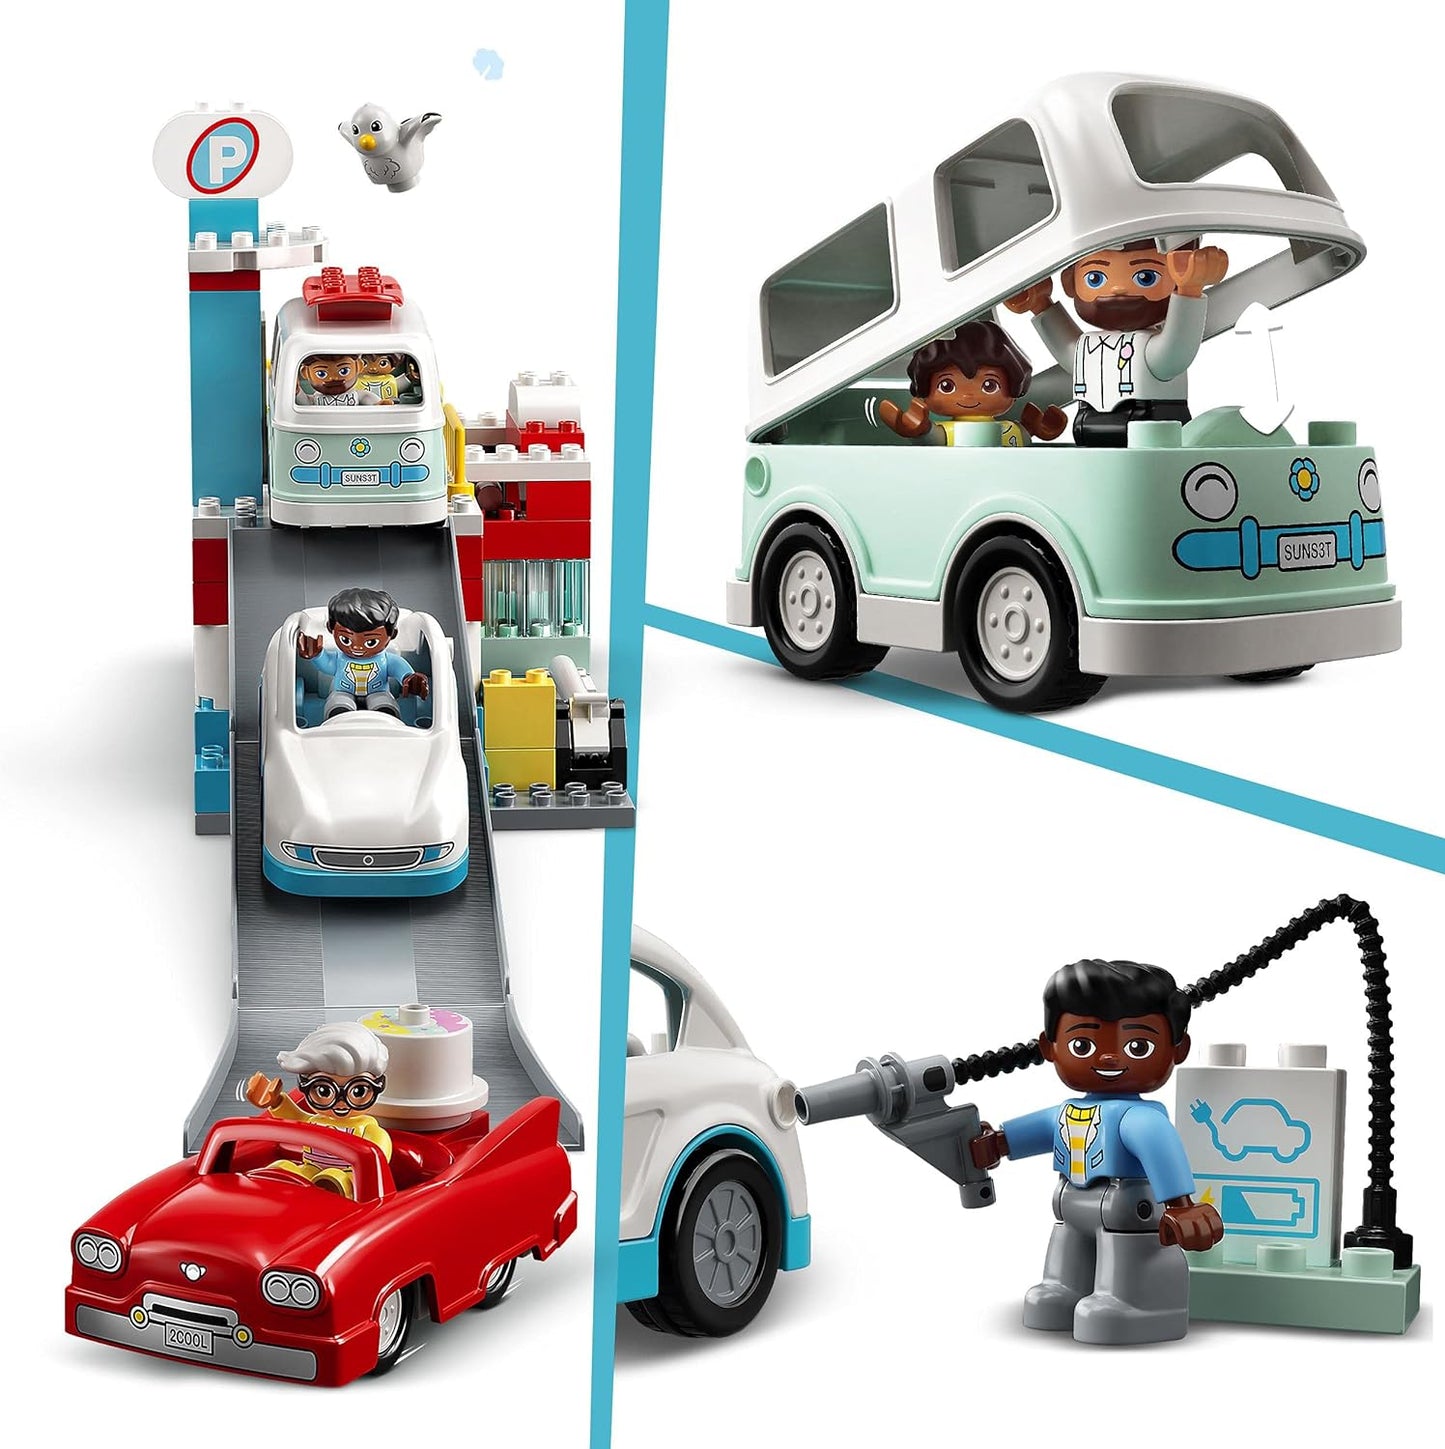 LEGO® DUPLO® Car Park and Car Wash 10948 Kids’ Building Toy Featuring a Car Wash, Petrol Station and Car Park